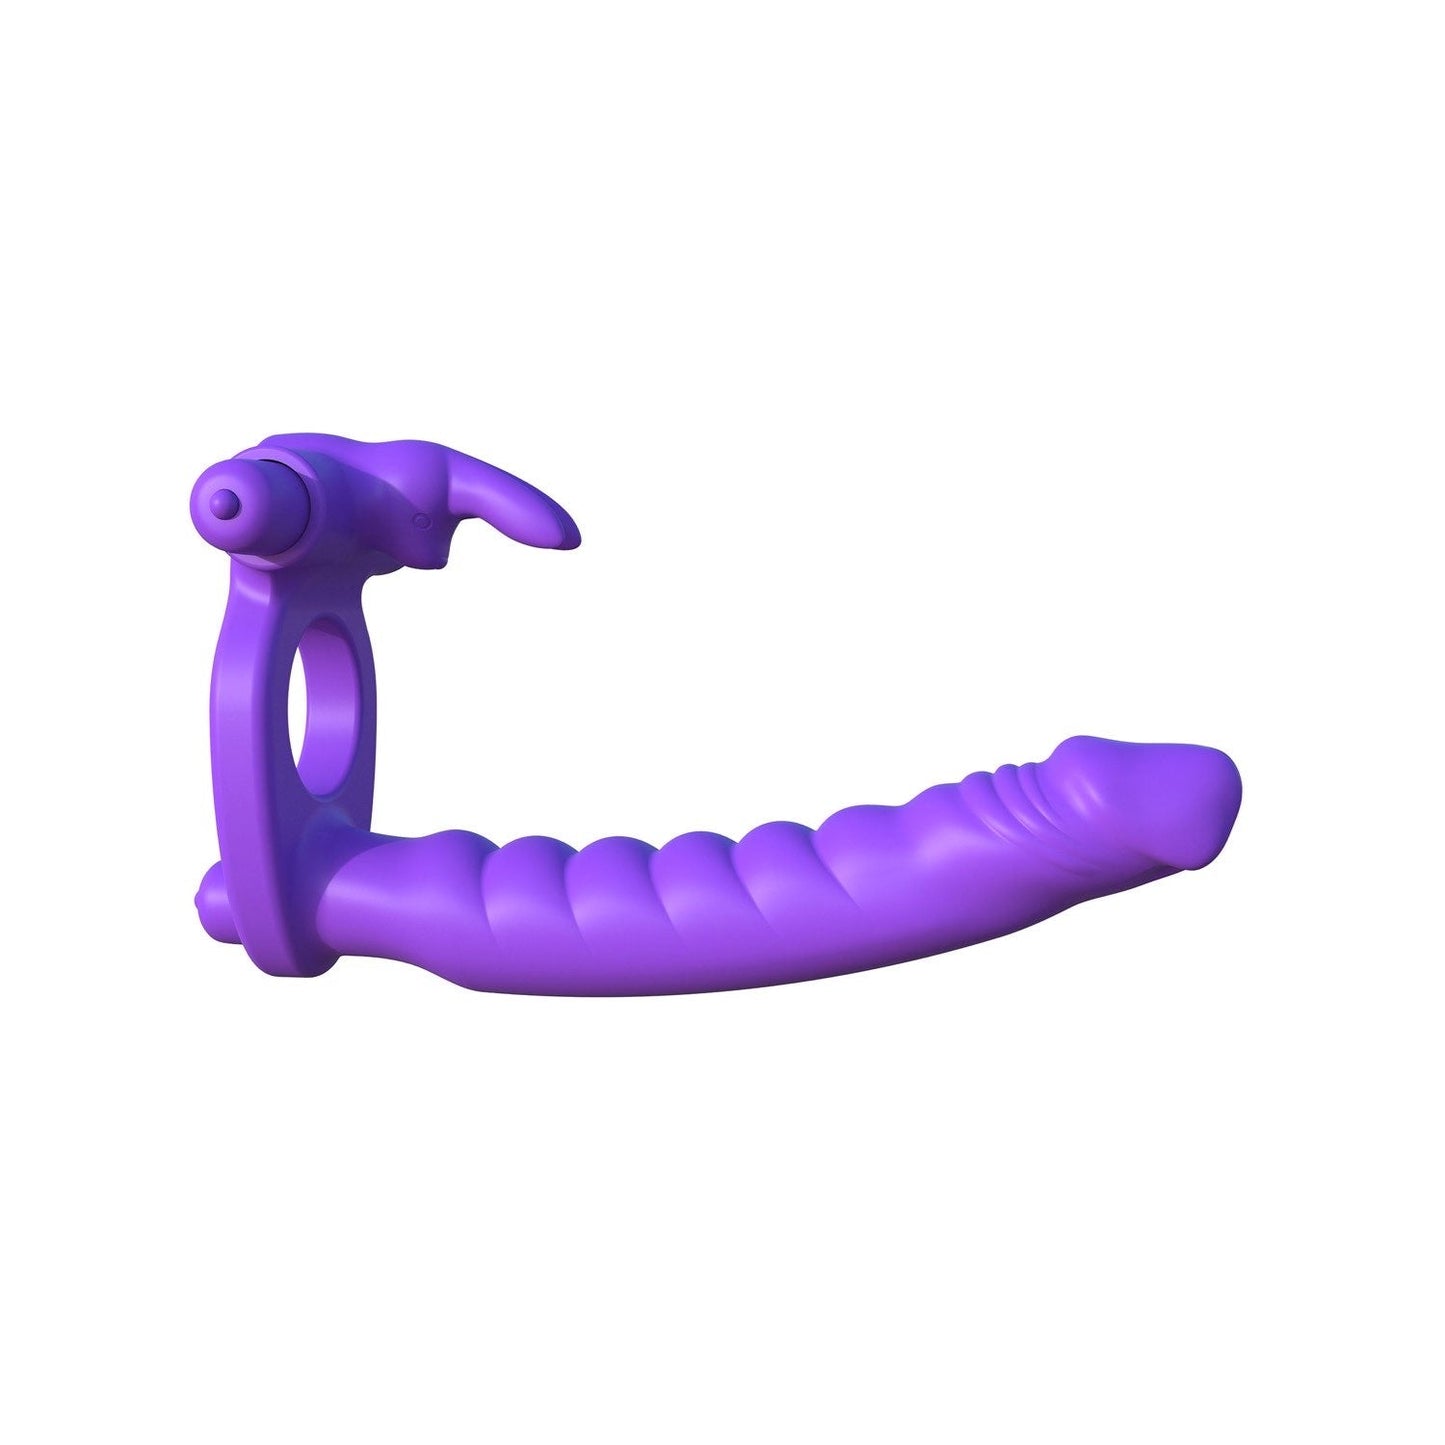 Fantasy C-ringz Silicone Double Penetrator Rabbit - Purple Vibrating Cock Ring with Anal Penetrator